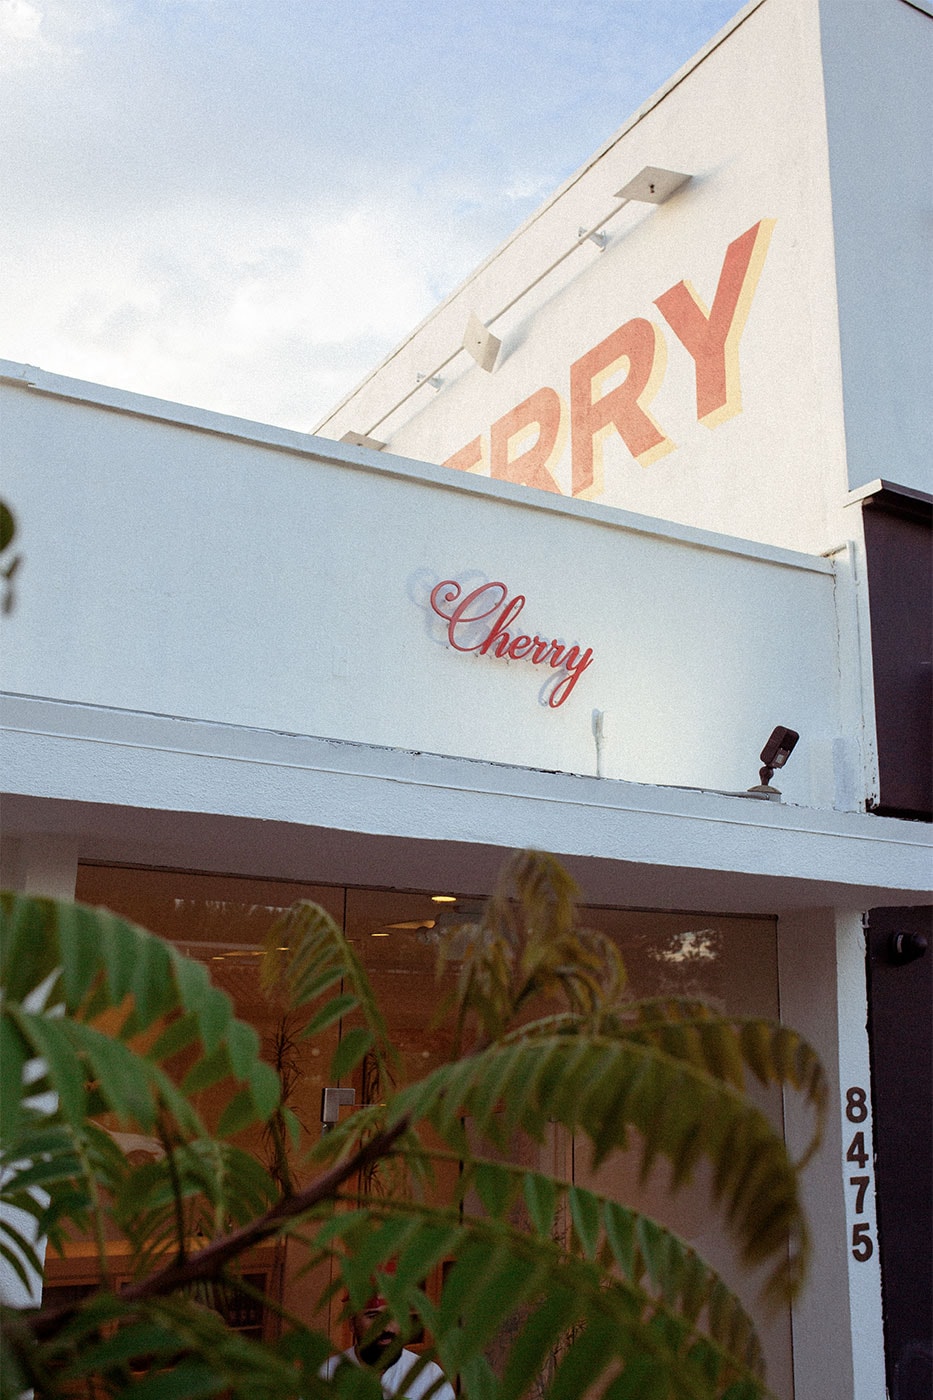 Cherry General Store Quality Goods Opens on 8475 Melrose Ave 90069 June 25 los angeles california opening date info